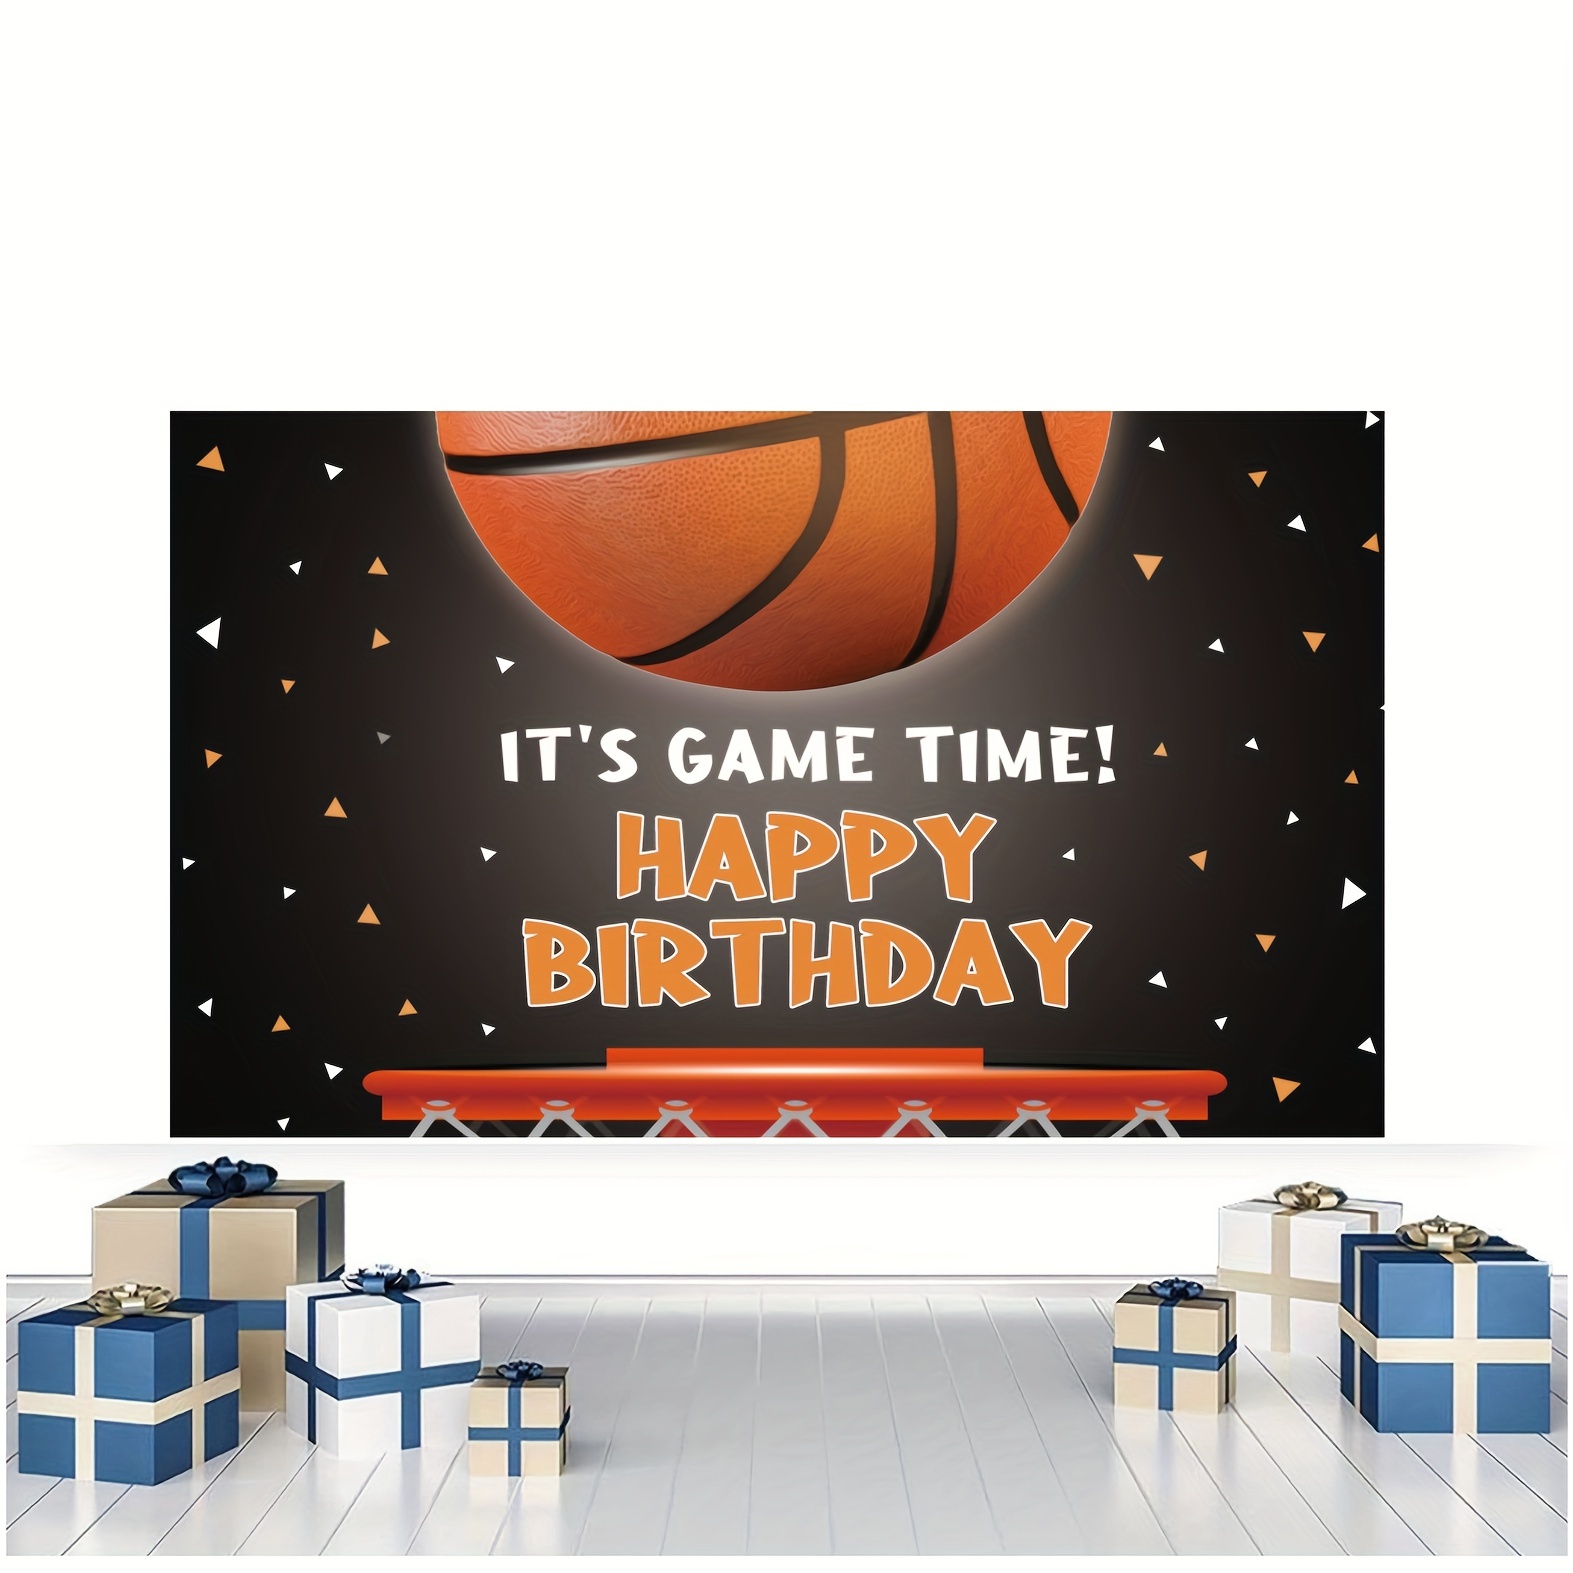 Basketball Backdrop Cover Decoration for Boys Birthday Party